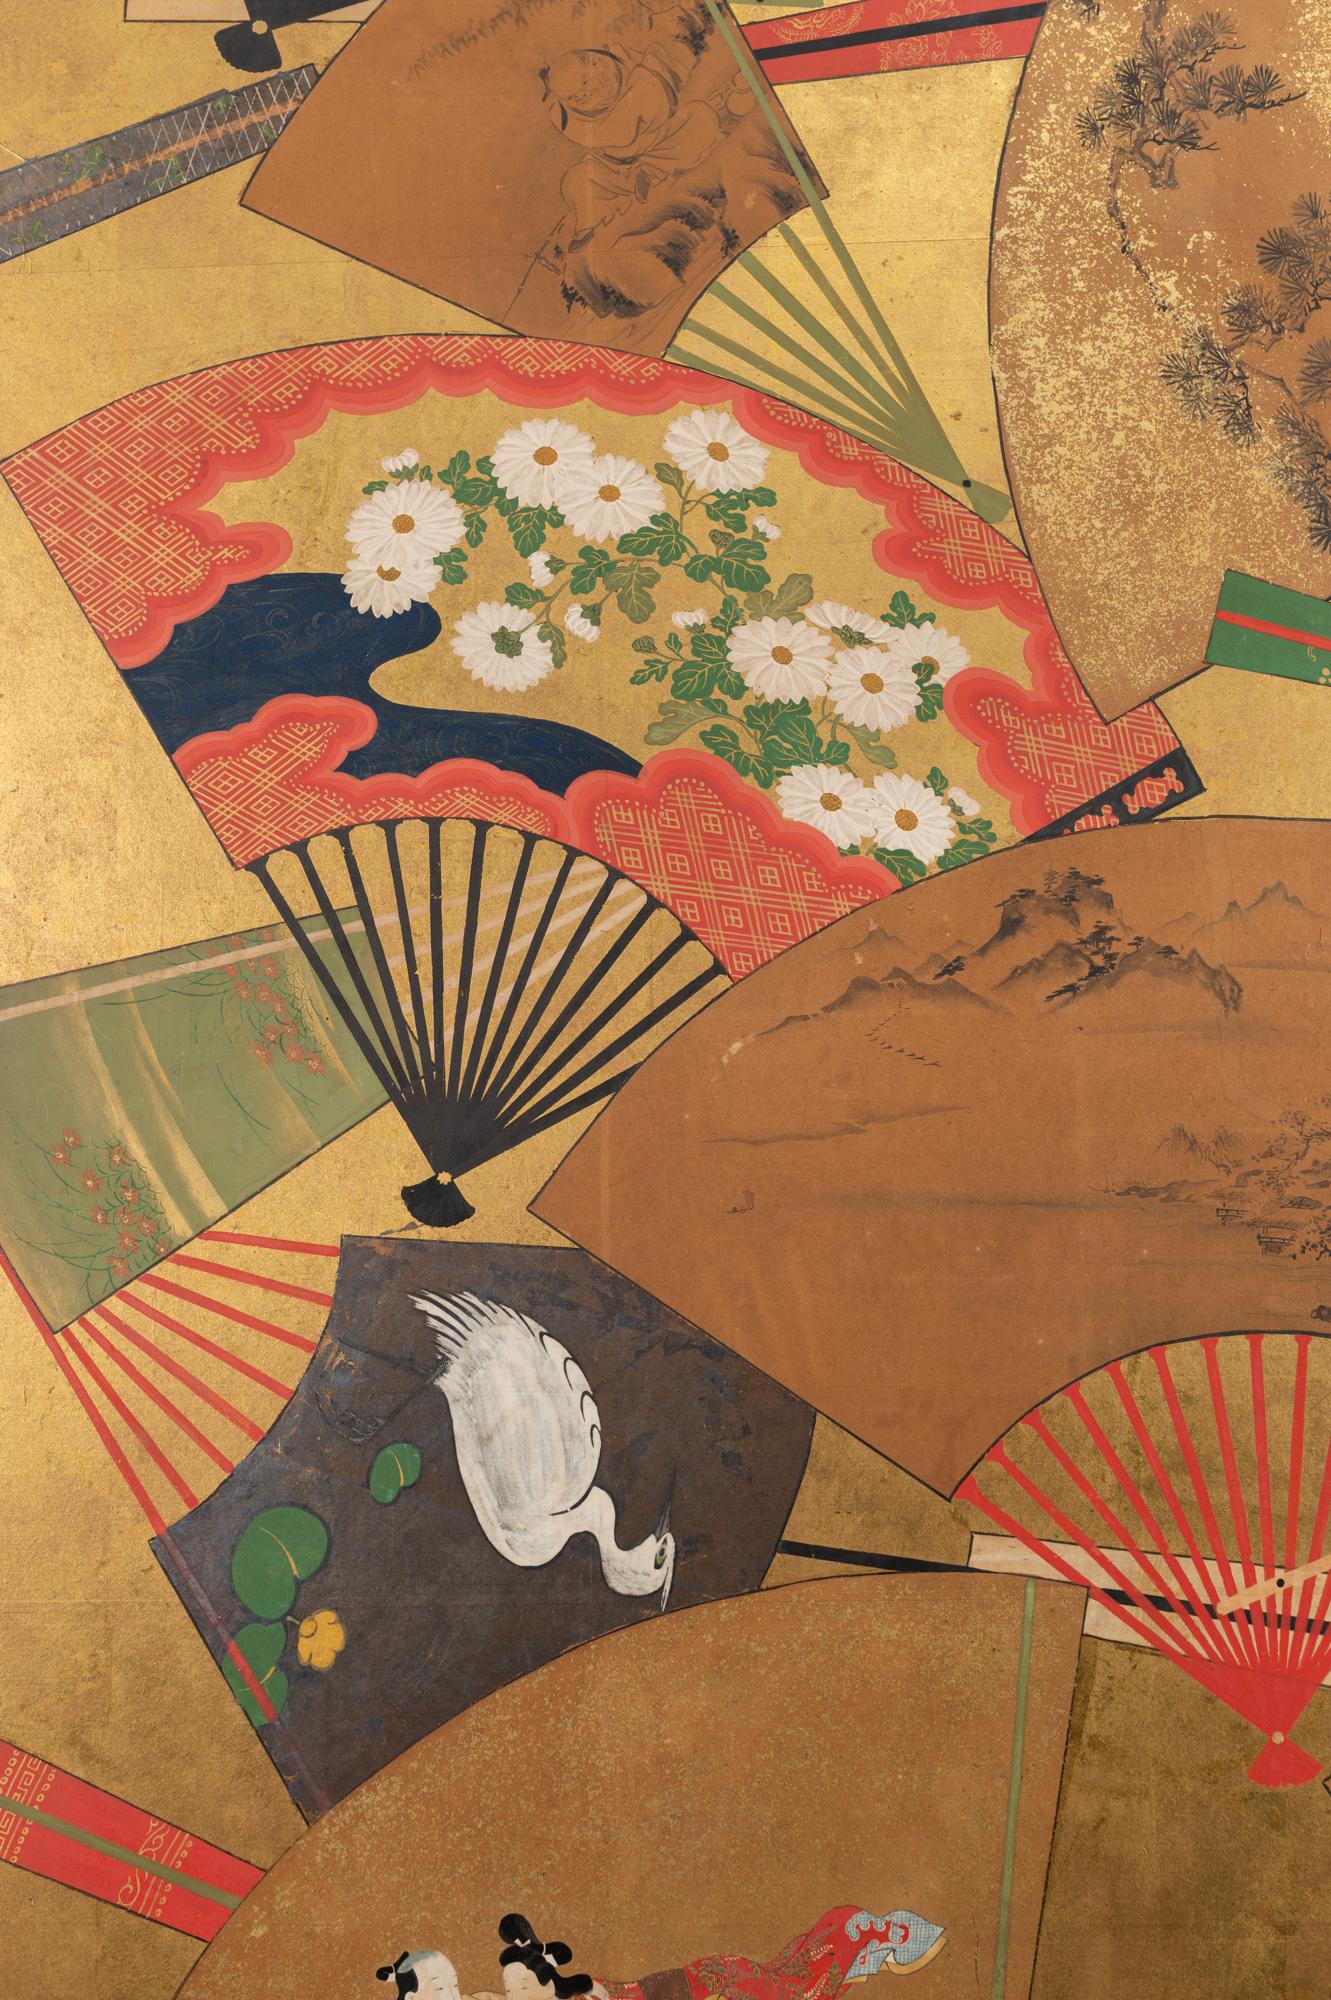 Japanese two-panel screen: Rimpa painting of fans on gold. A beautifully painted Edo period (early 19th century) Rimpa School painting of fans featuring traditional motifs in Japanese art: samurai, cherry blossoms, Mt. Fuji, waves, and more. A